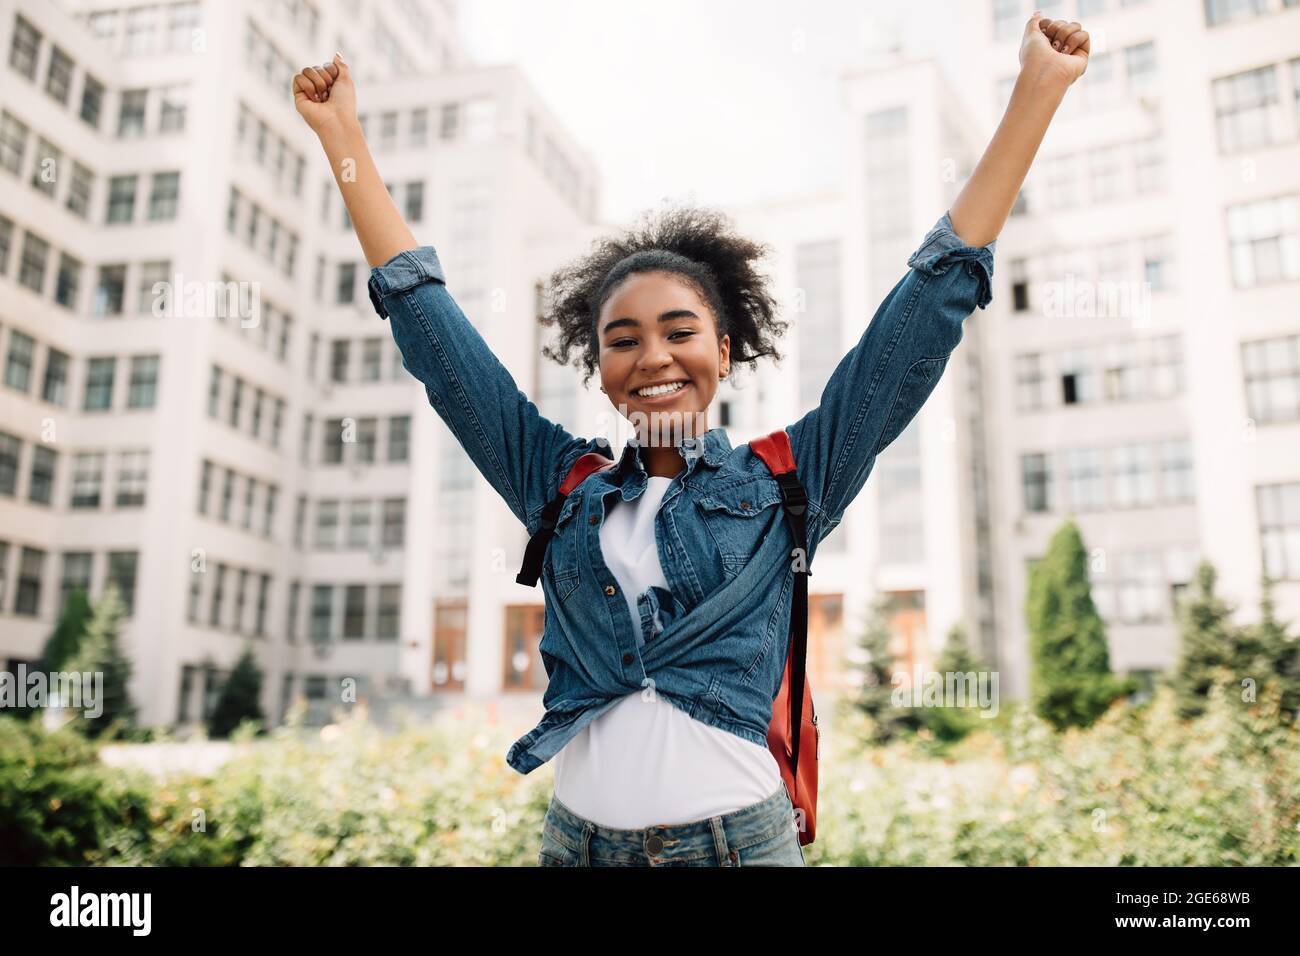 Passed Exam. Joyful Black Student Girl Shaking Fists Raising Arms Celebrating First Day In College Posing With Backpack Near University Building Outdo Stock Photo